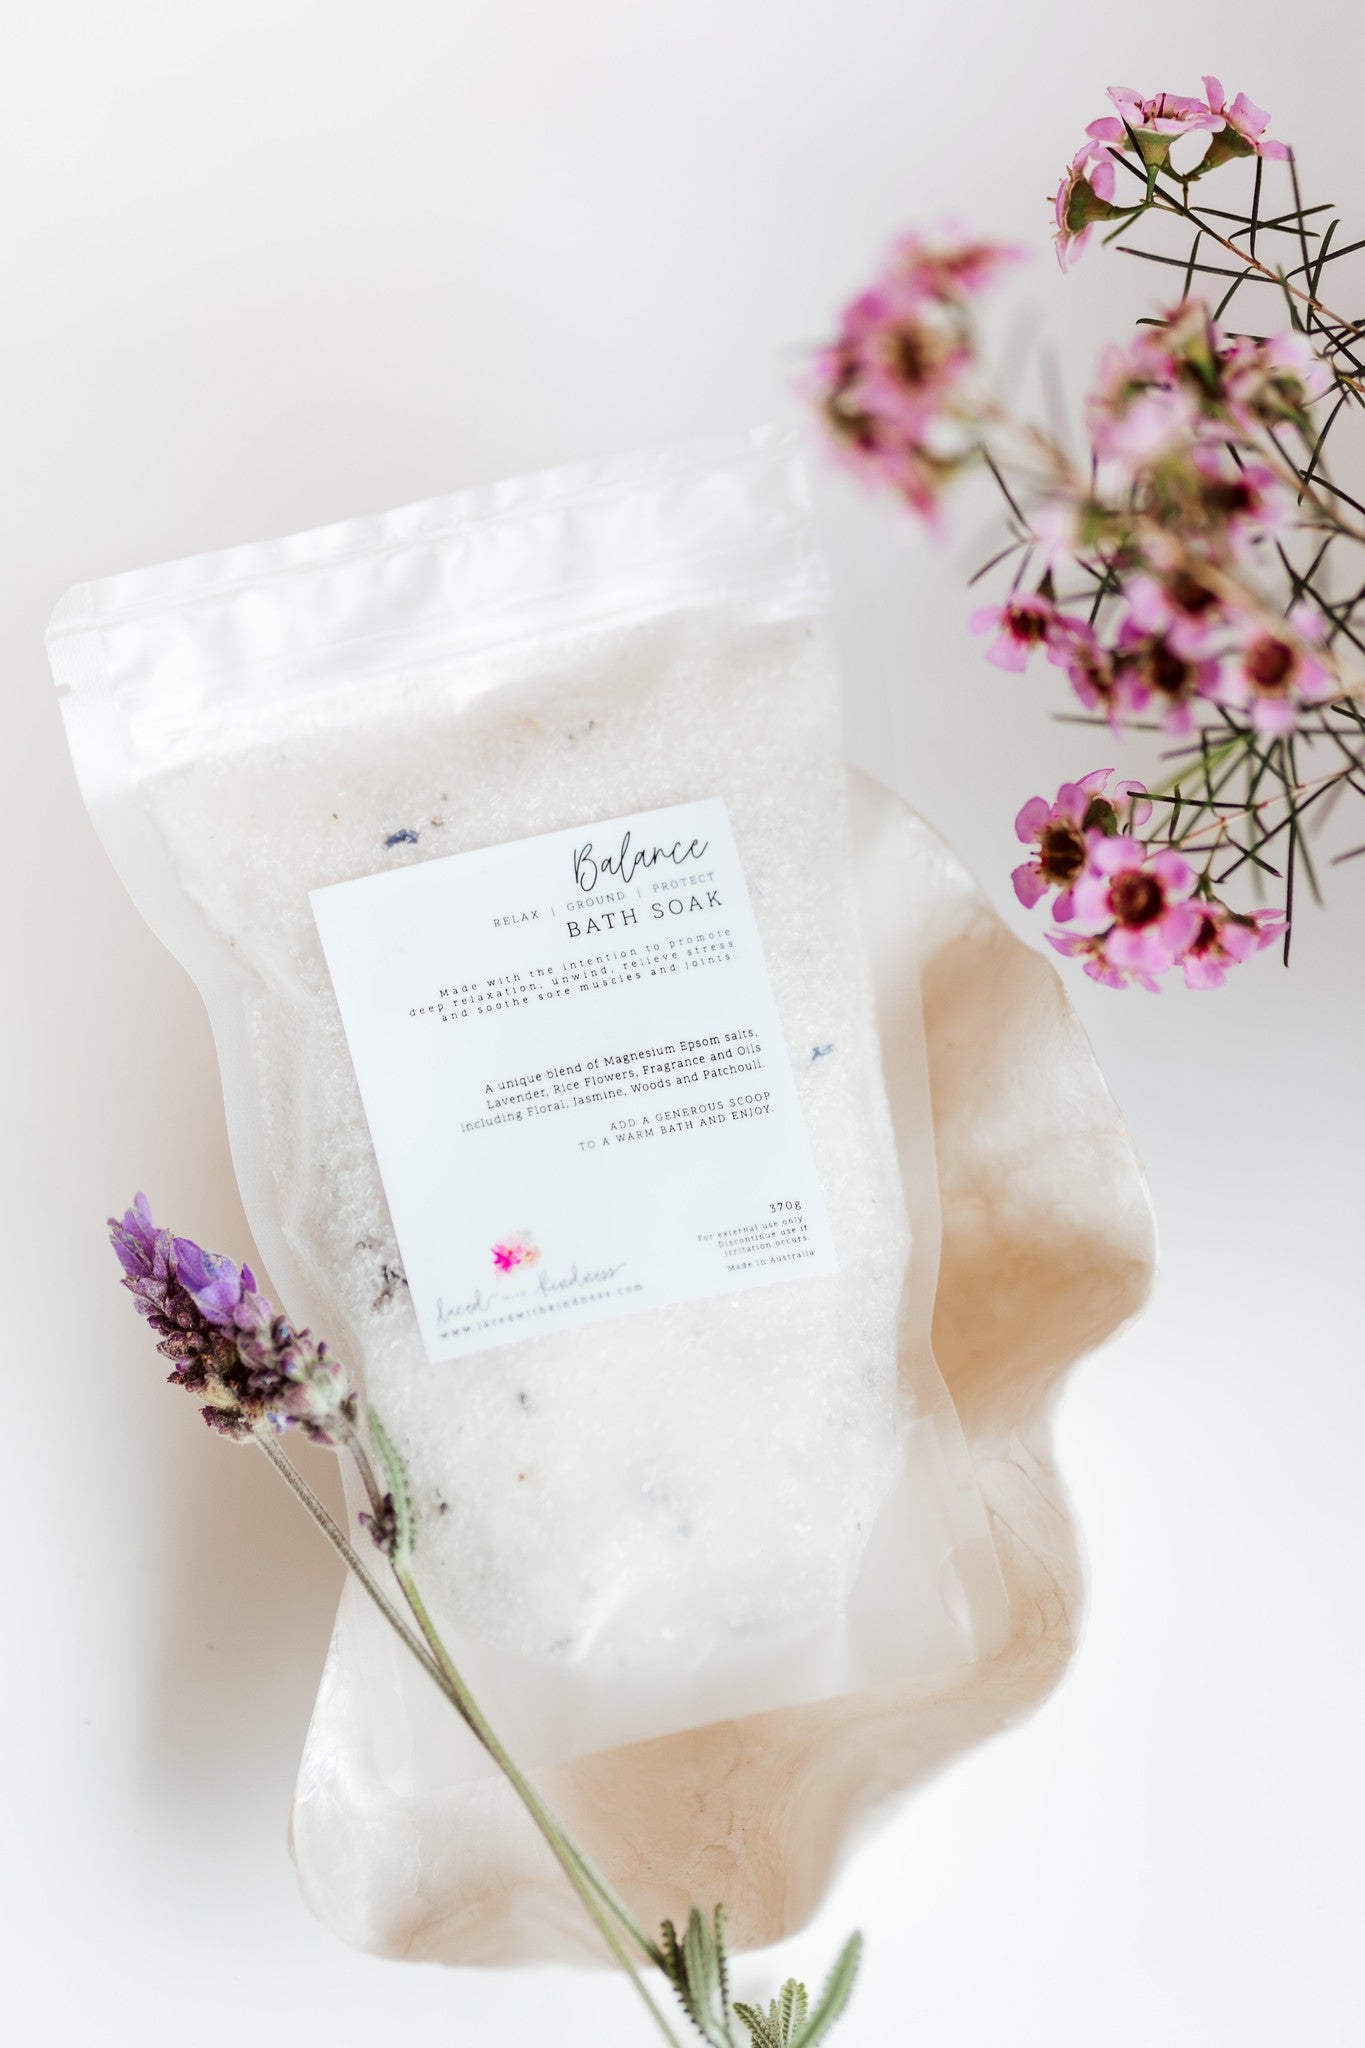 Balance Bath salts and soak containing magnesium, epsom salts, lavender, rice flowers, jasmine, woods and patchouli to enjoy a relaxing and soothing bath. Australian owned and made Laced with Kindness Homewares Luxury bath salts